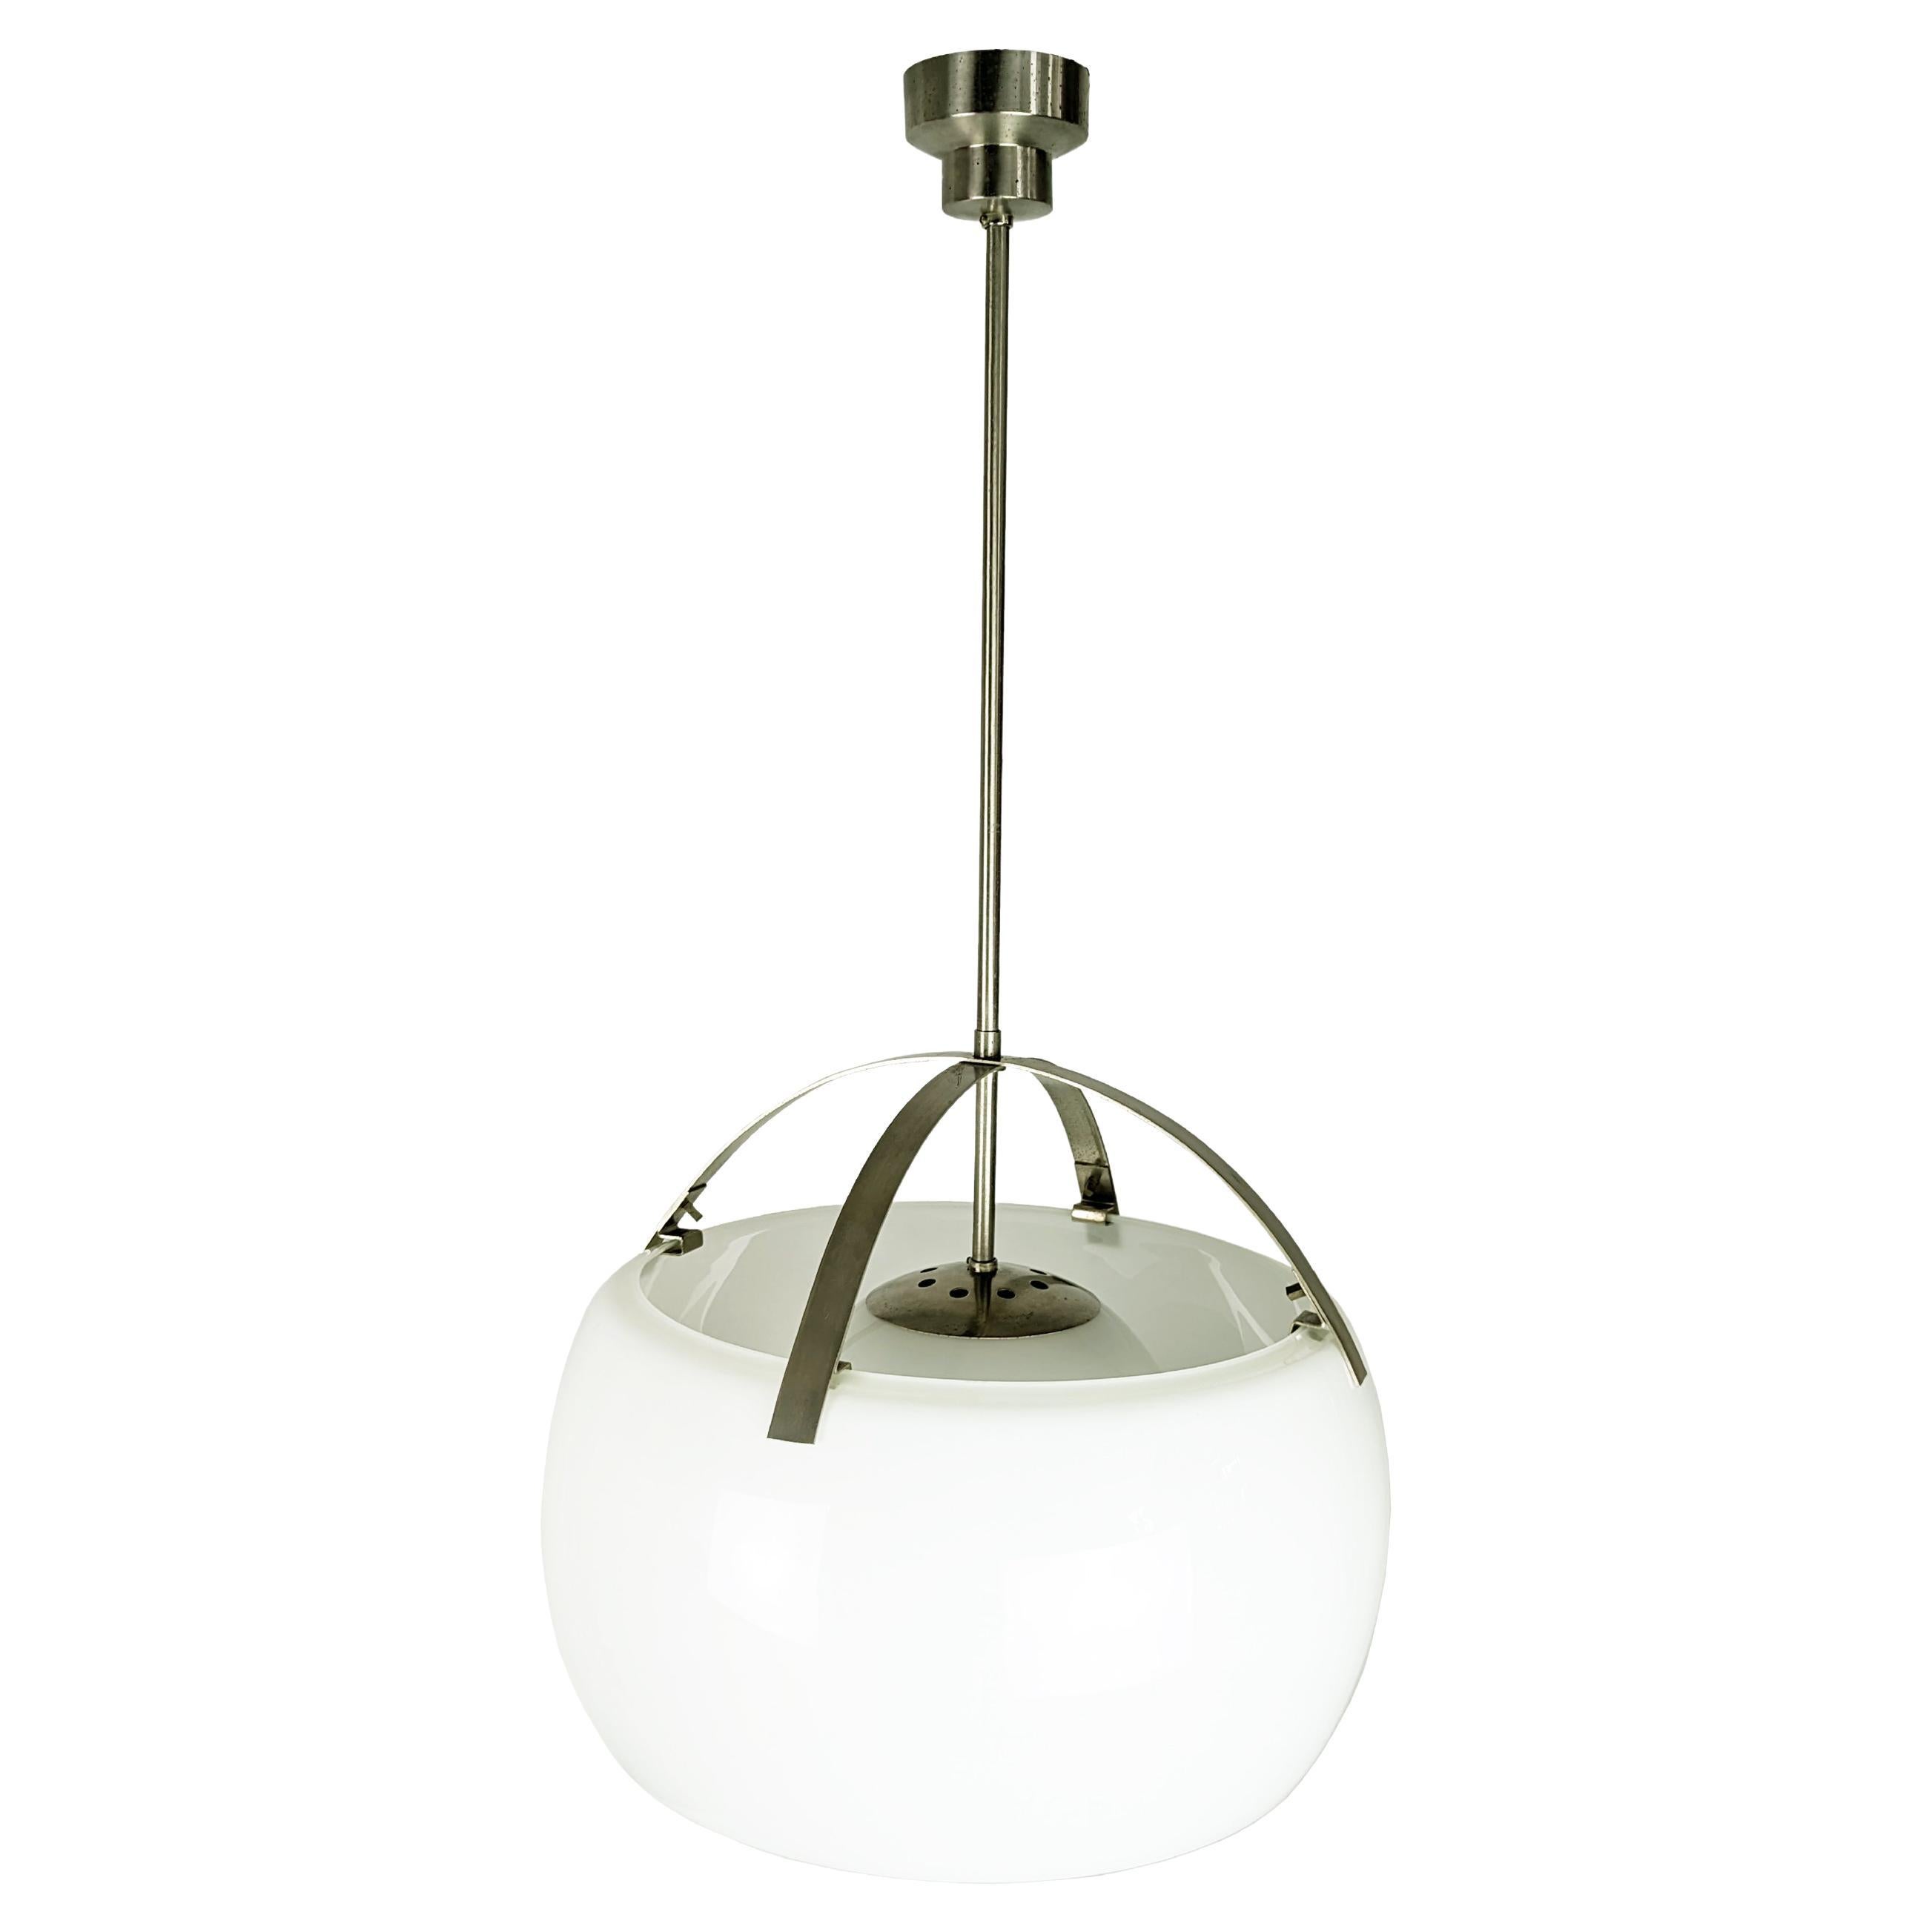 Nickel Plated Brass Omega pendant Lamp by Vico Magistretti for Artemide, 1960s For Sale